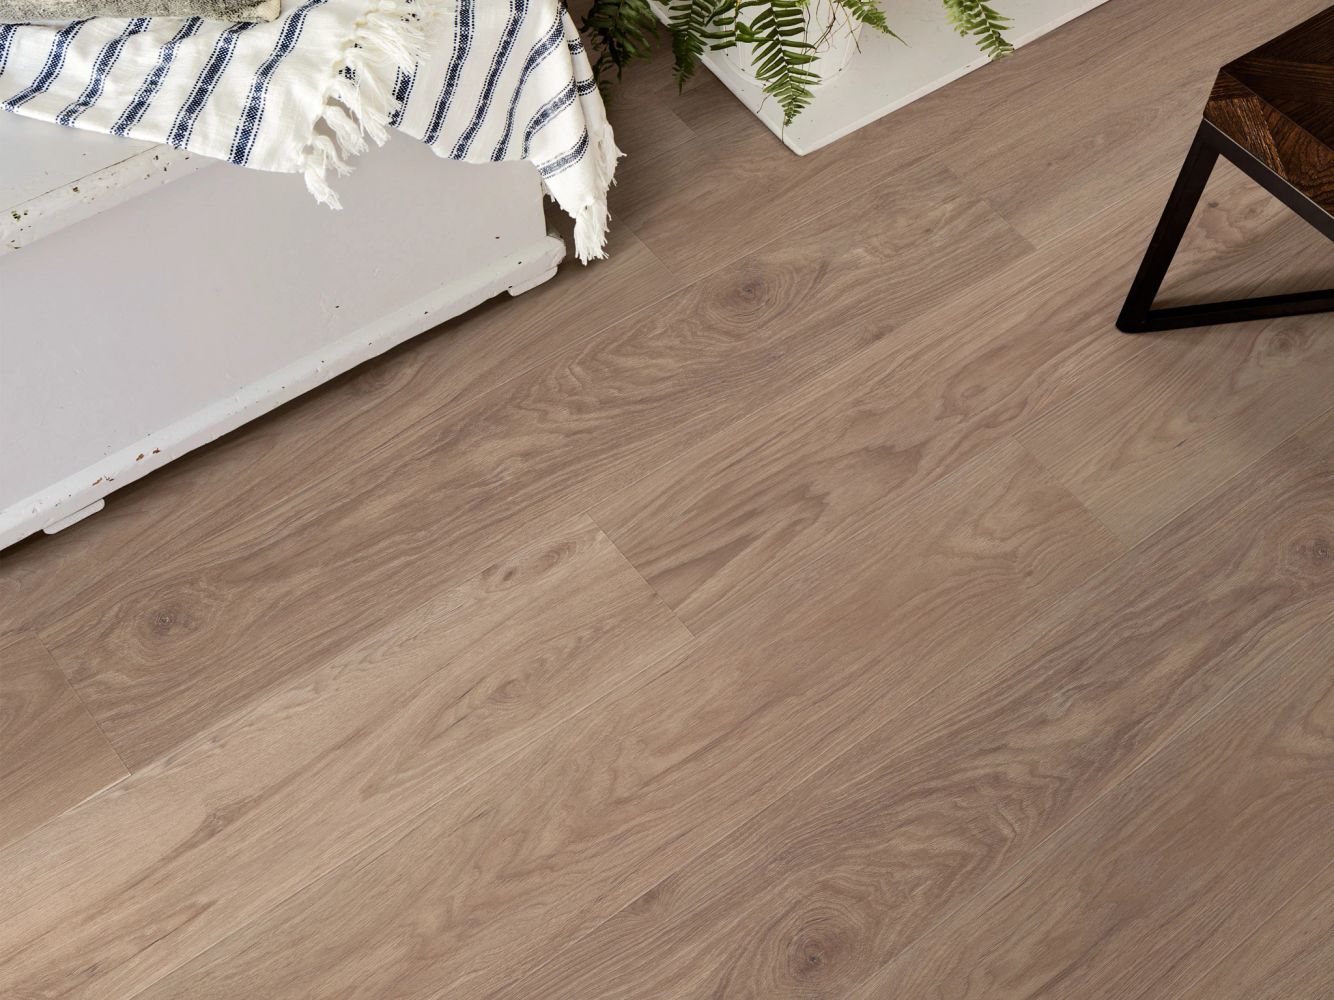 Shaw Floors Resilient Residential Pantheon Hd+ Natural Bevel Truffle 07234_1051V